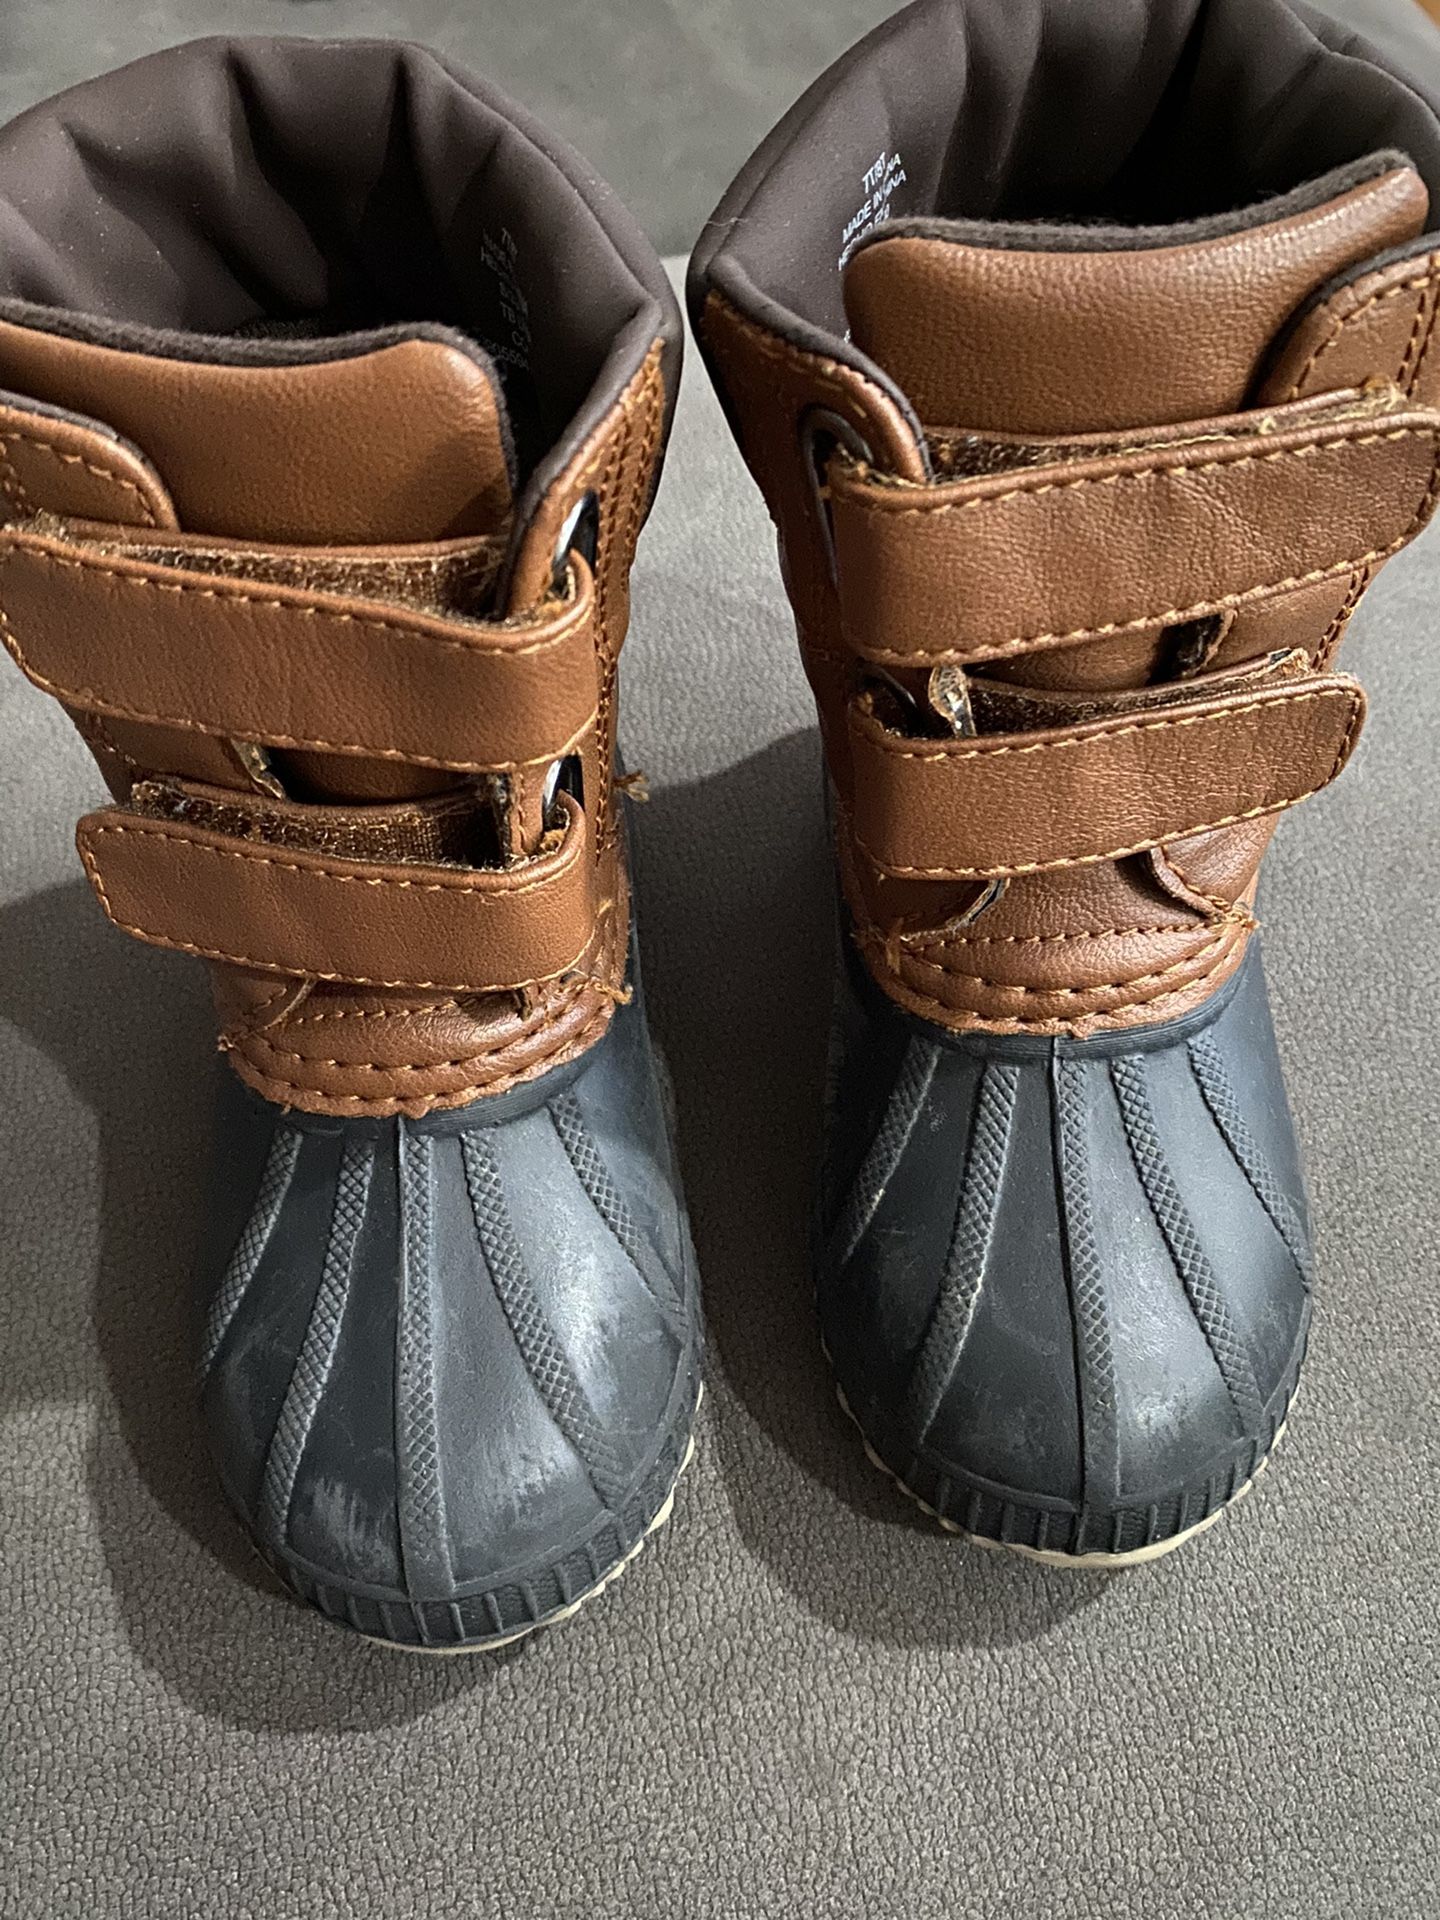 Toddler duck boots 7T/8T